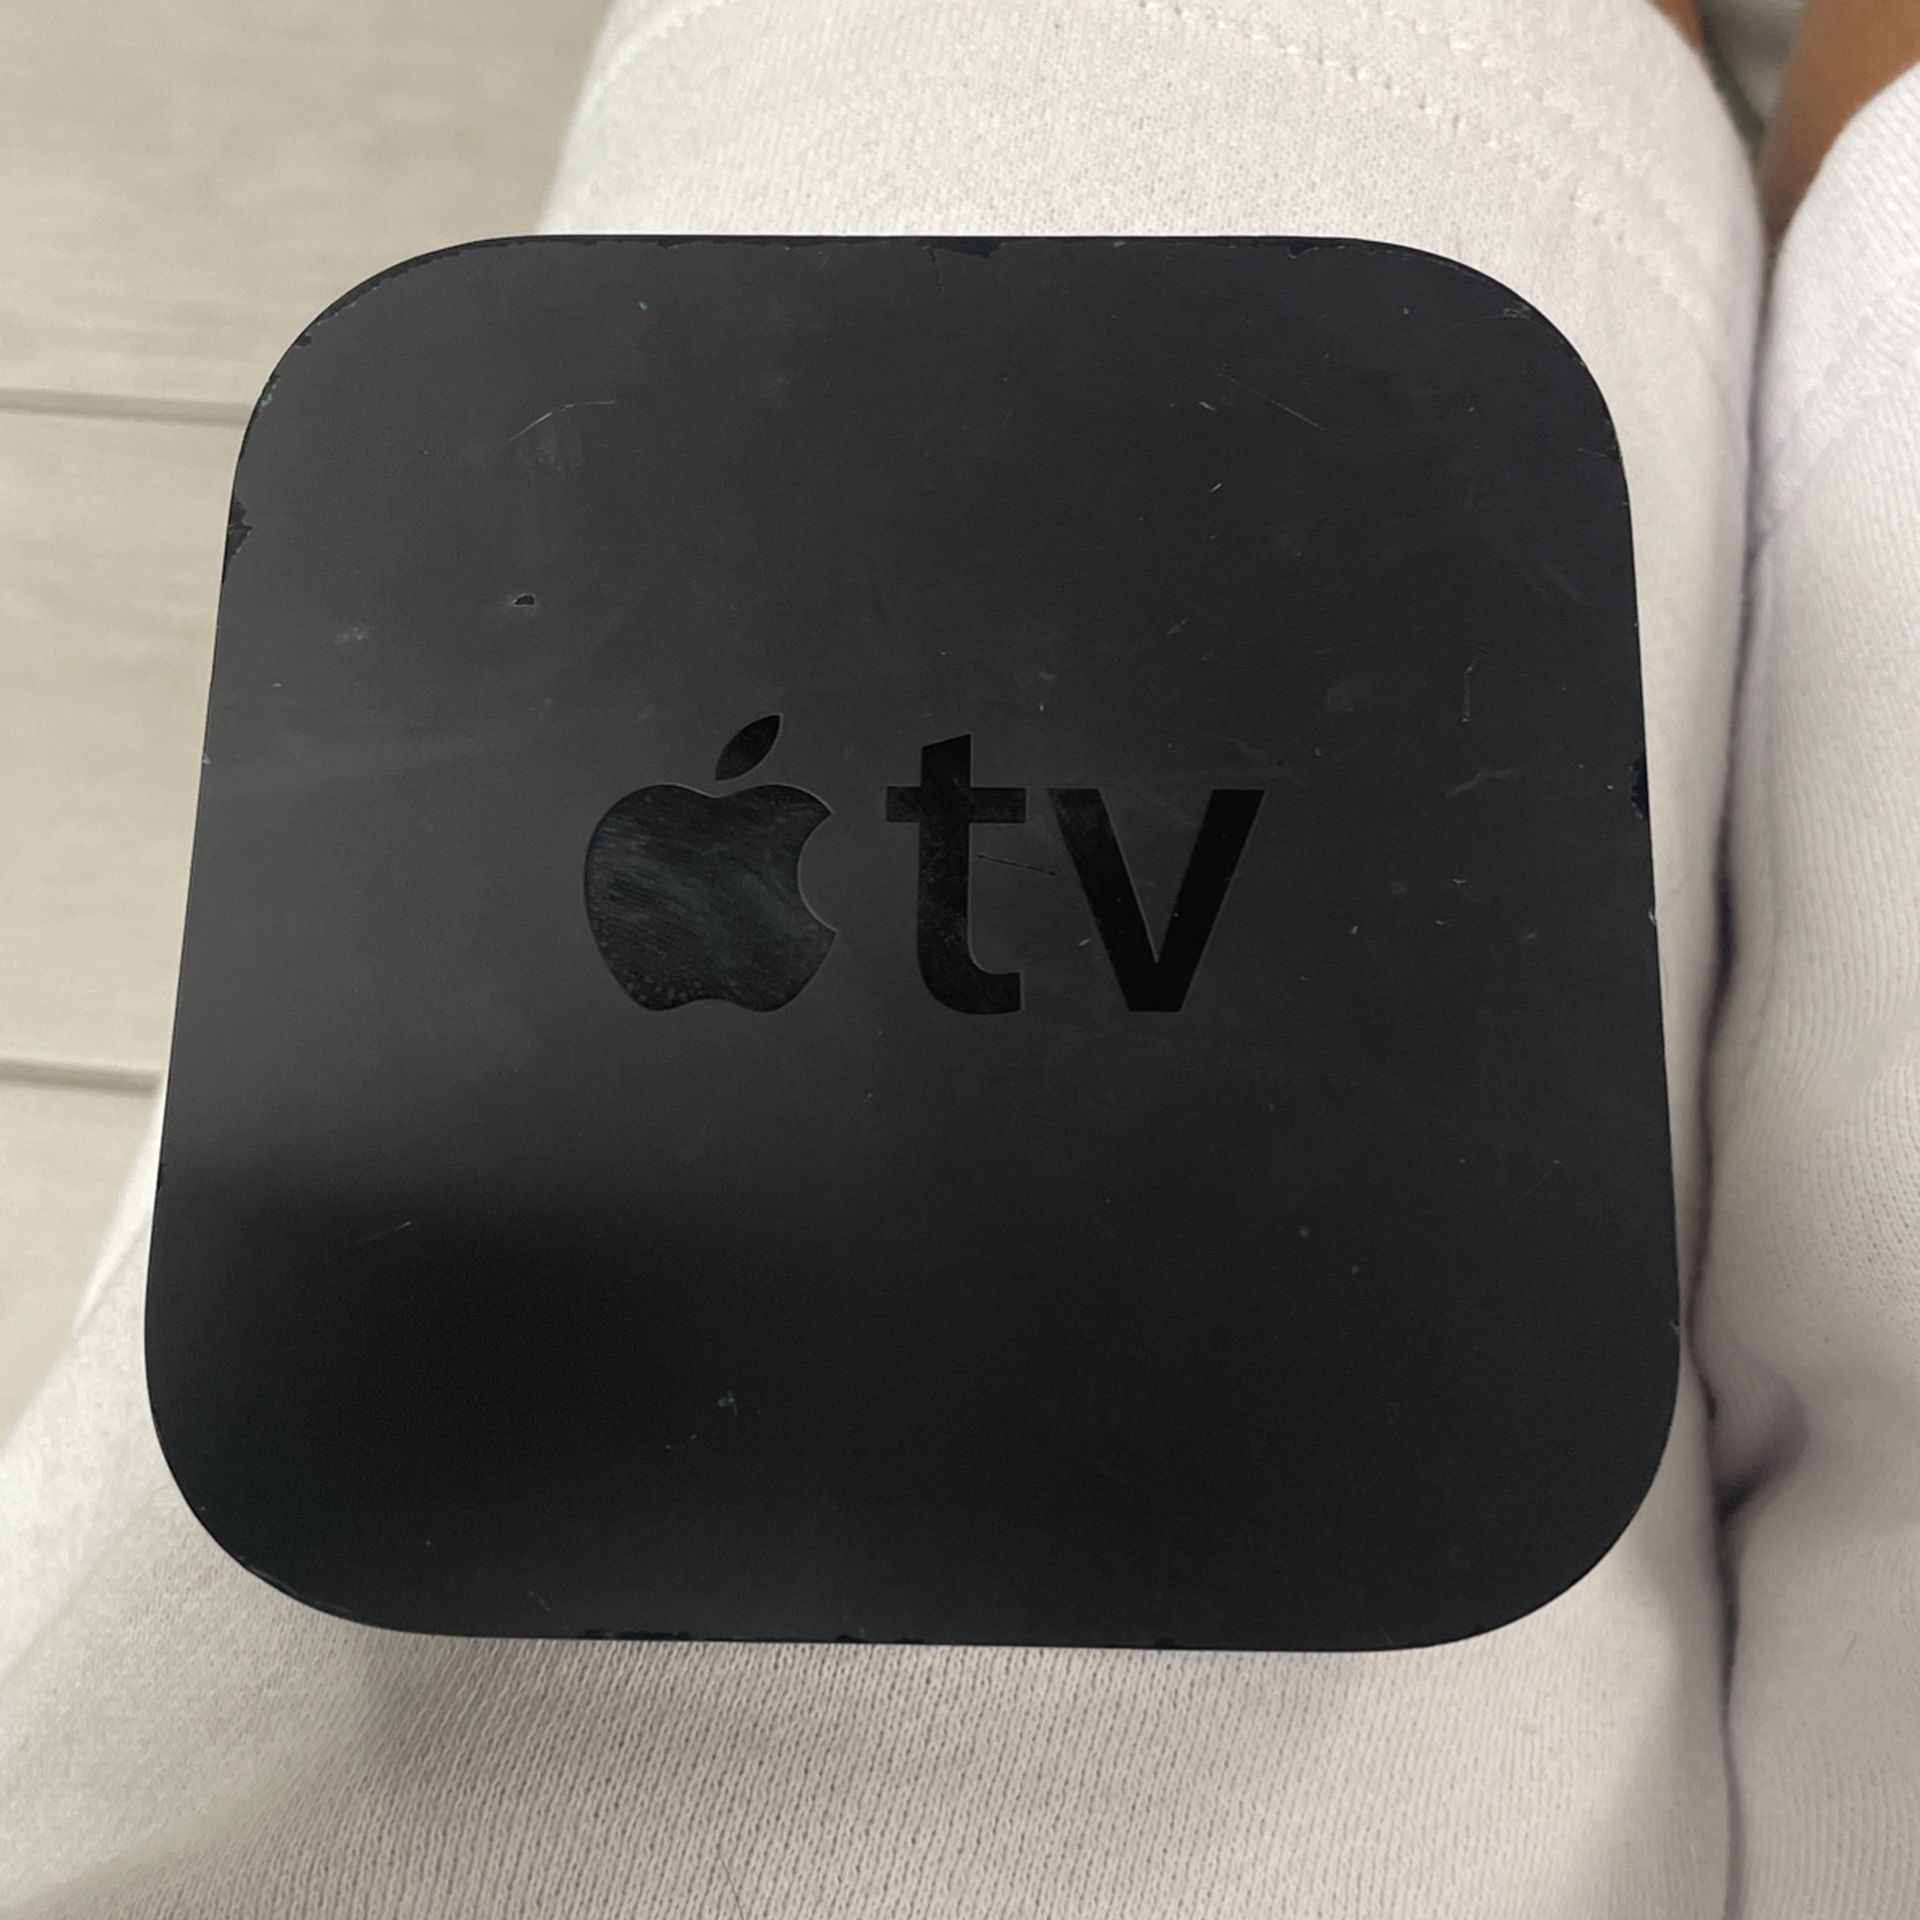 Pre Owned Apple Tv (model a1469 )